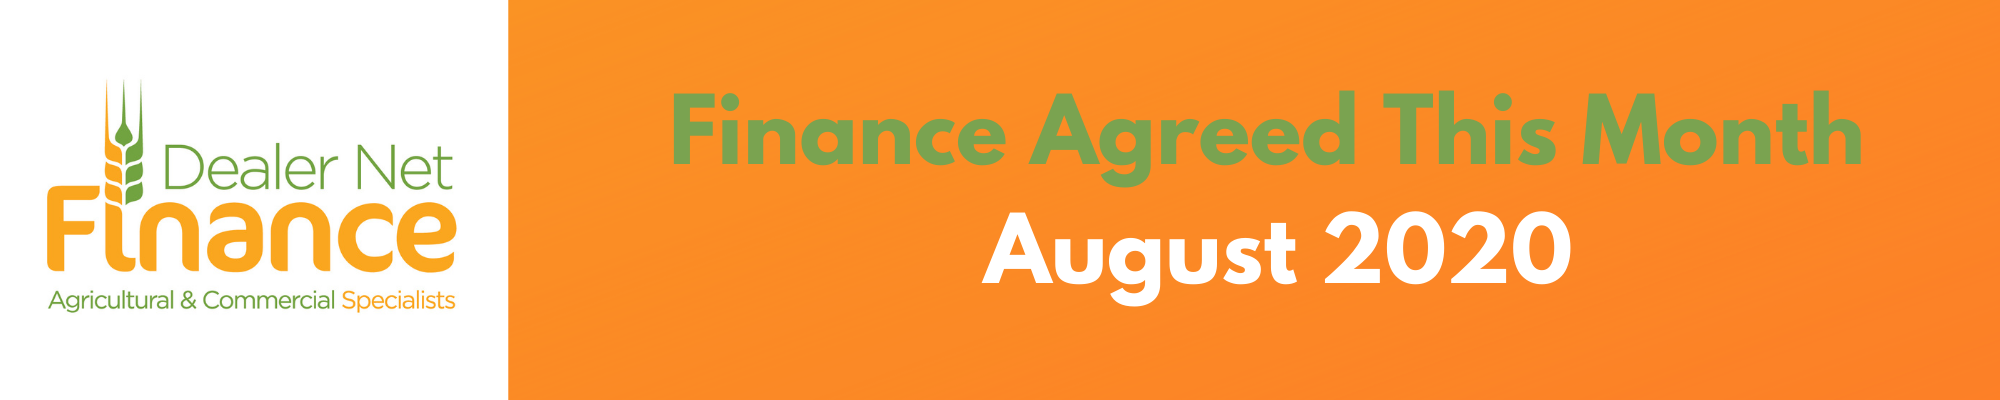 Finance Agreed This Month – August 2020